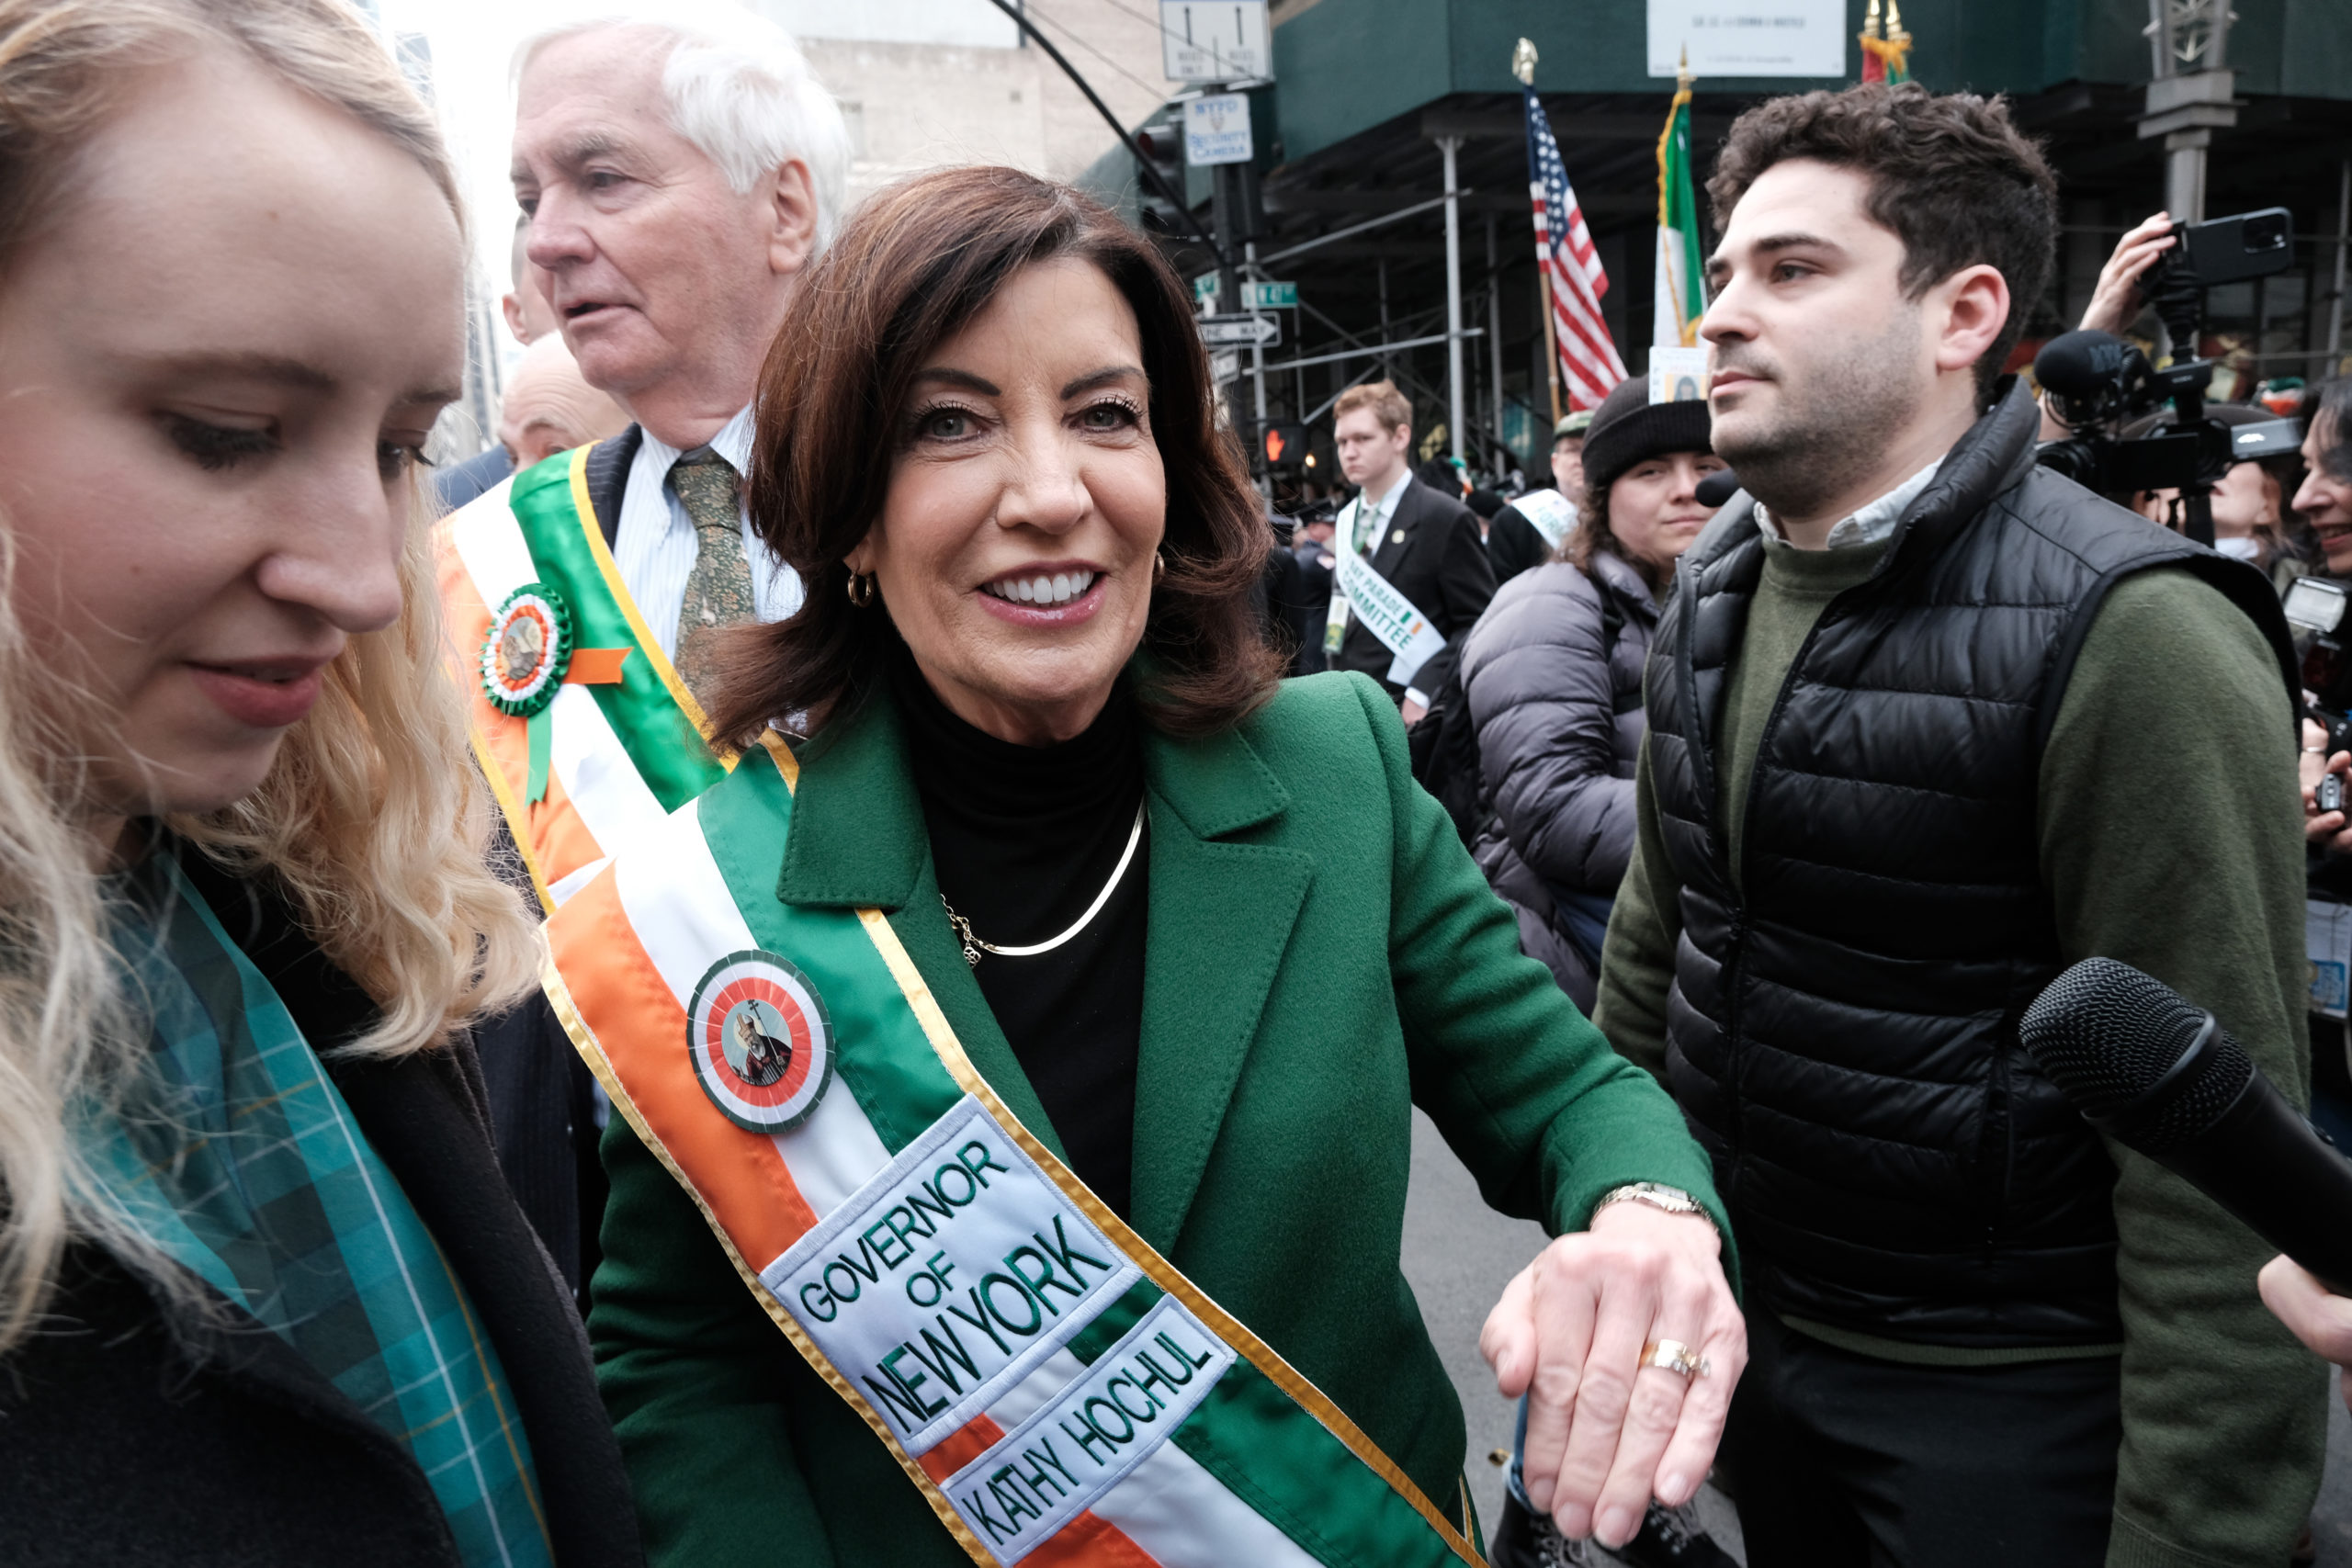 NEW YORK, NEW YORK - MARCH 17: New York Governor Kathy Hochul participates in the St. Patrick's Day Parade along 5th Ave. on March 17, 2023 in New York City. Known as the world's largest St. Patrick's Day Parade, dozens of bands, performers politicians, and other groups made their way up Fifth Avenue in a celebration of Irish heritage. (Photo by Spencer Platt/Getty Images)